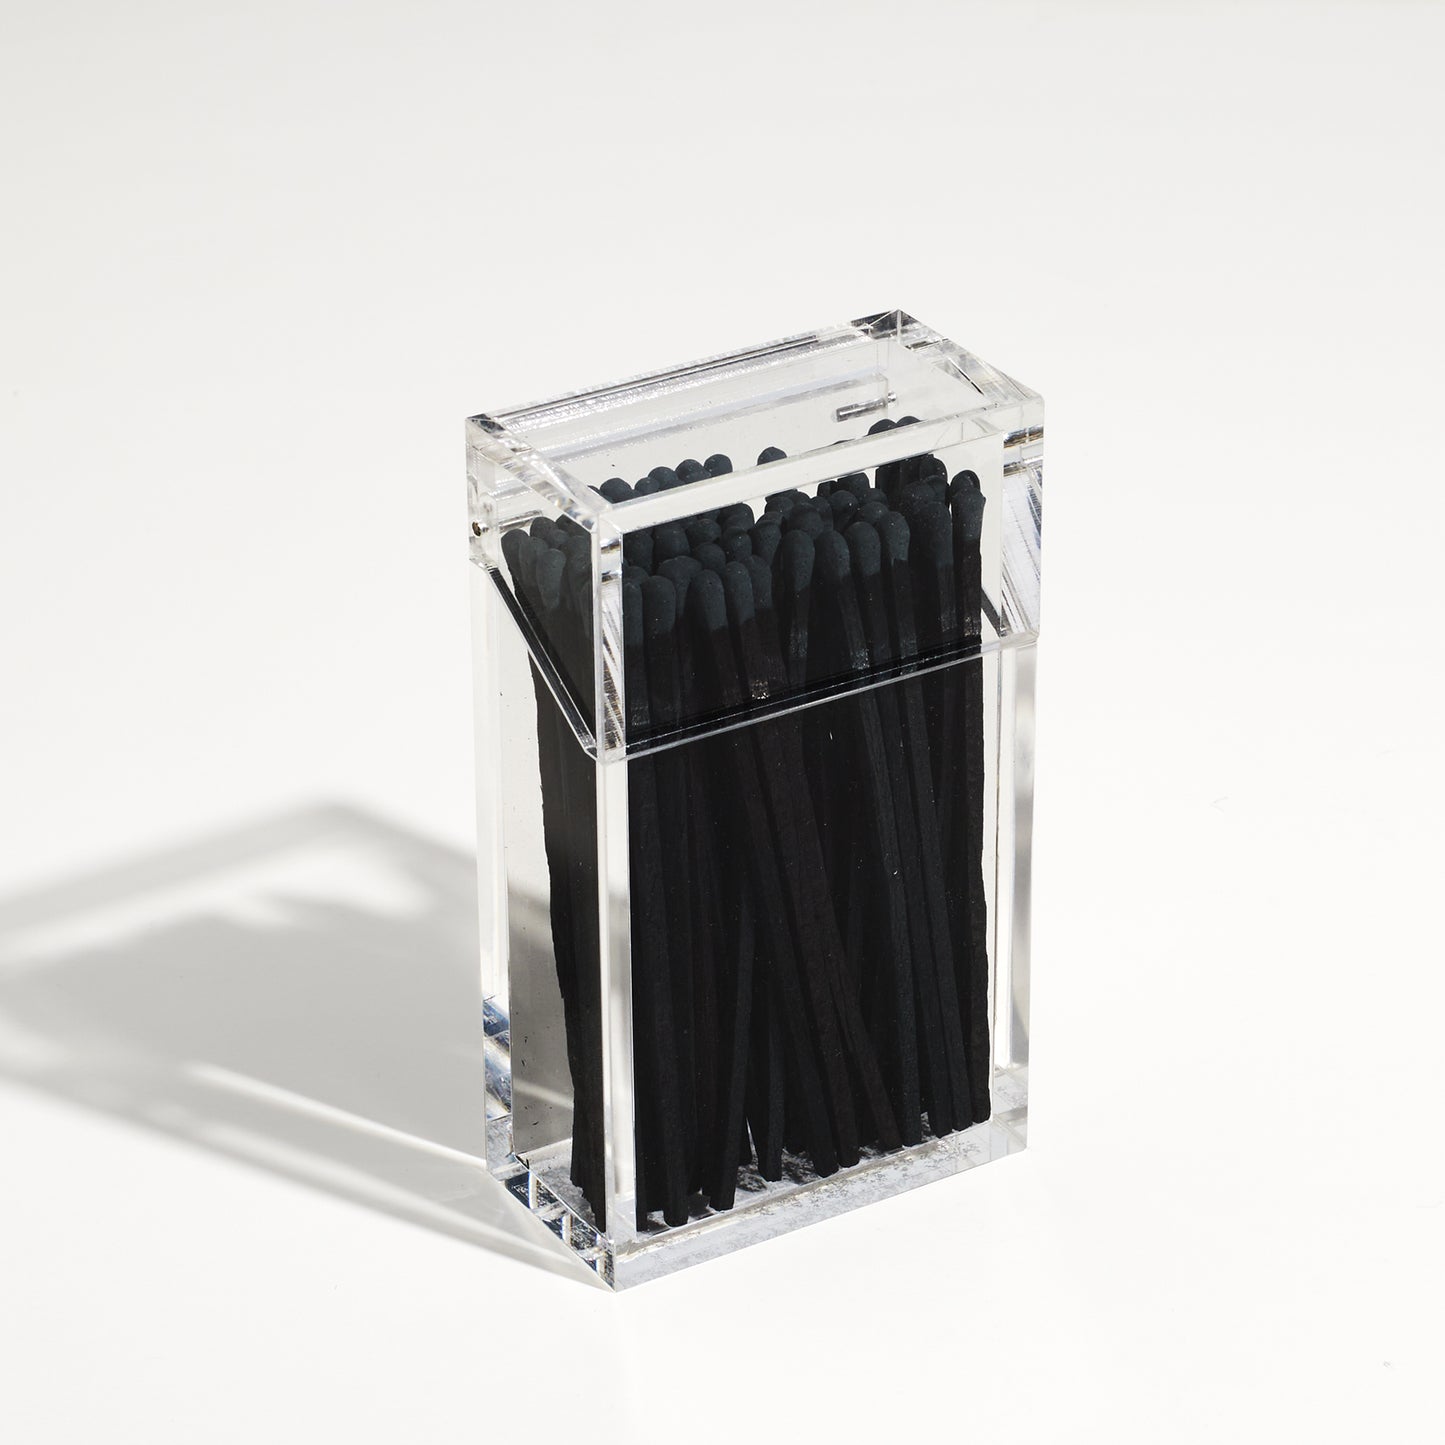 Closed Match holder shaped like a Cigarette style acrylic case with black matches in it.